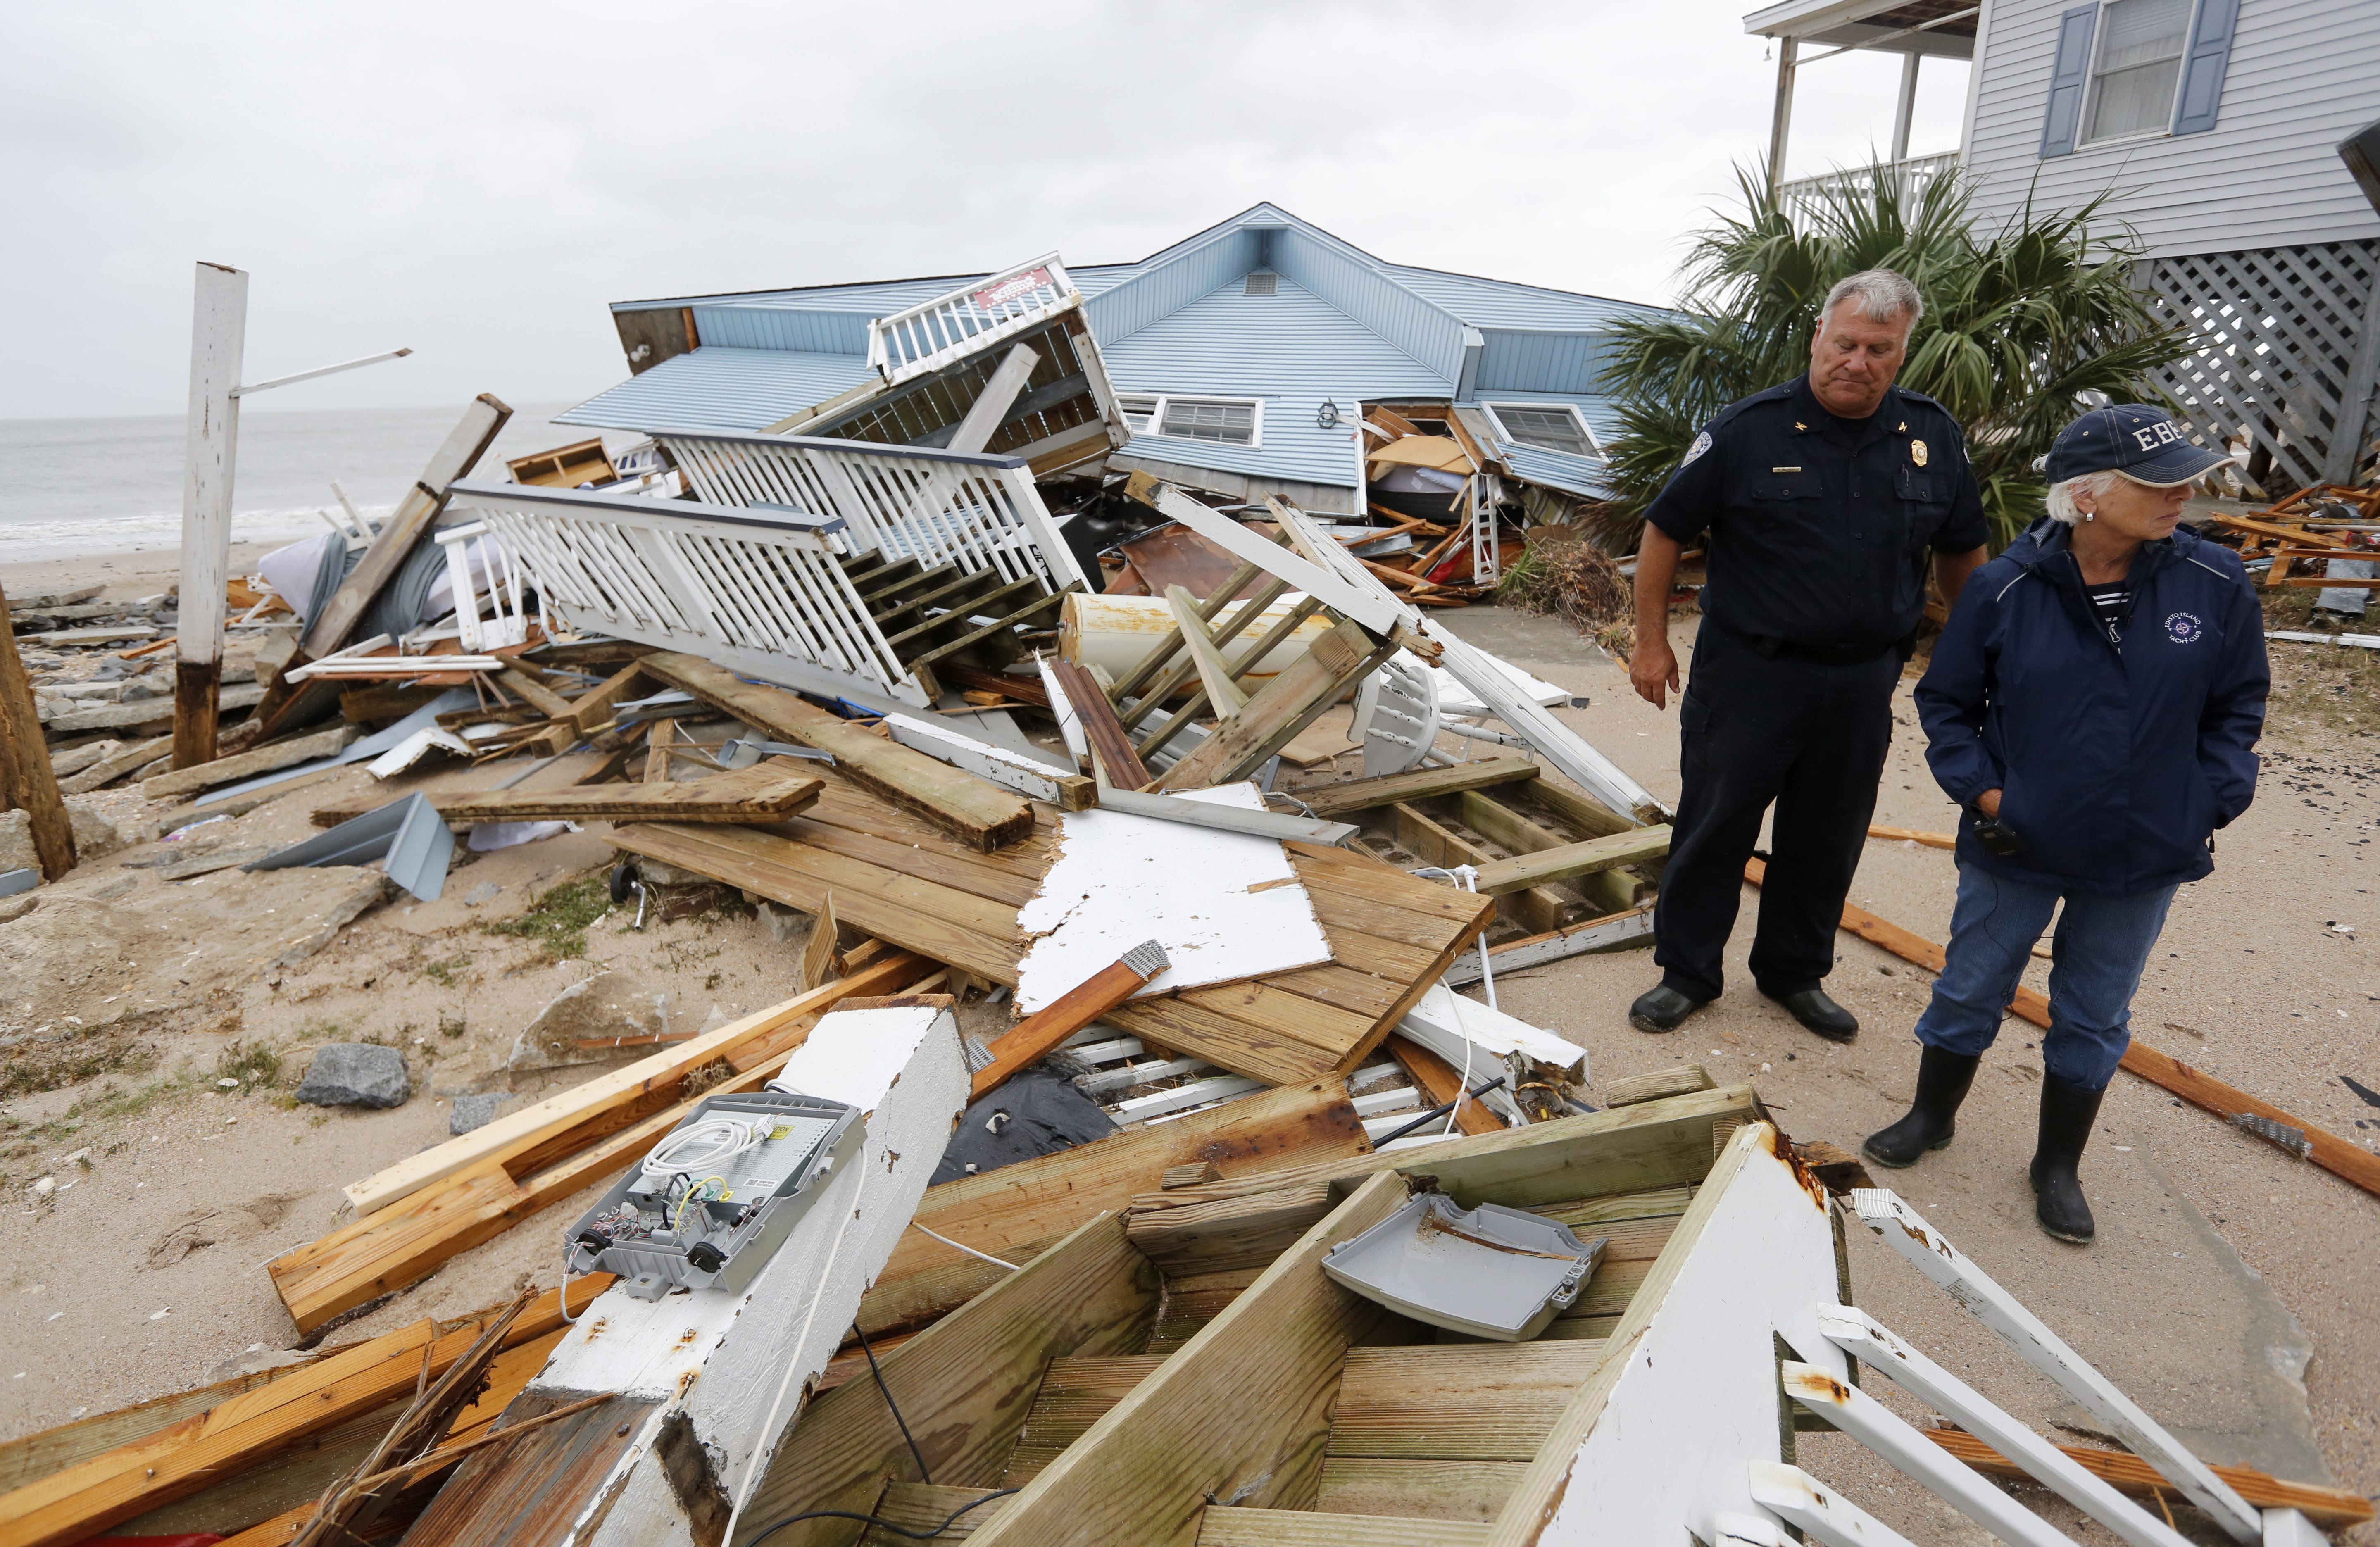 Town of Edisto Beach Chief of Police George Brothers, left, and Mayor Jane Darby survey the damage done to homes along Palmetto Blvd after Hurricane Matthew slammed into their tiny beach community Saturday, October, 8, 2016. The four-lane boulevard has been covered with sand.